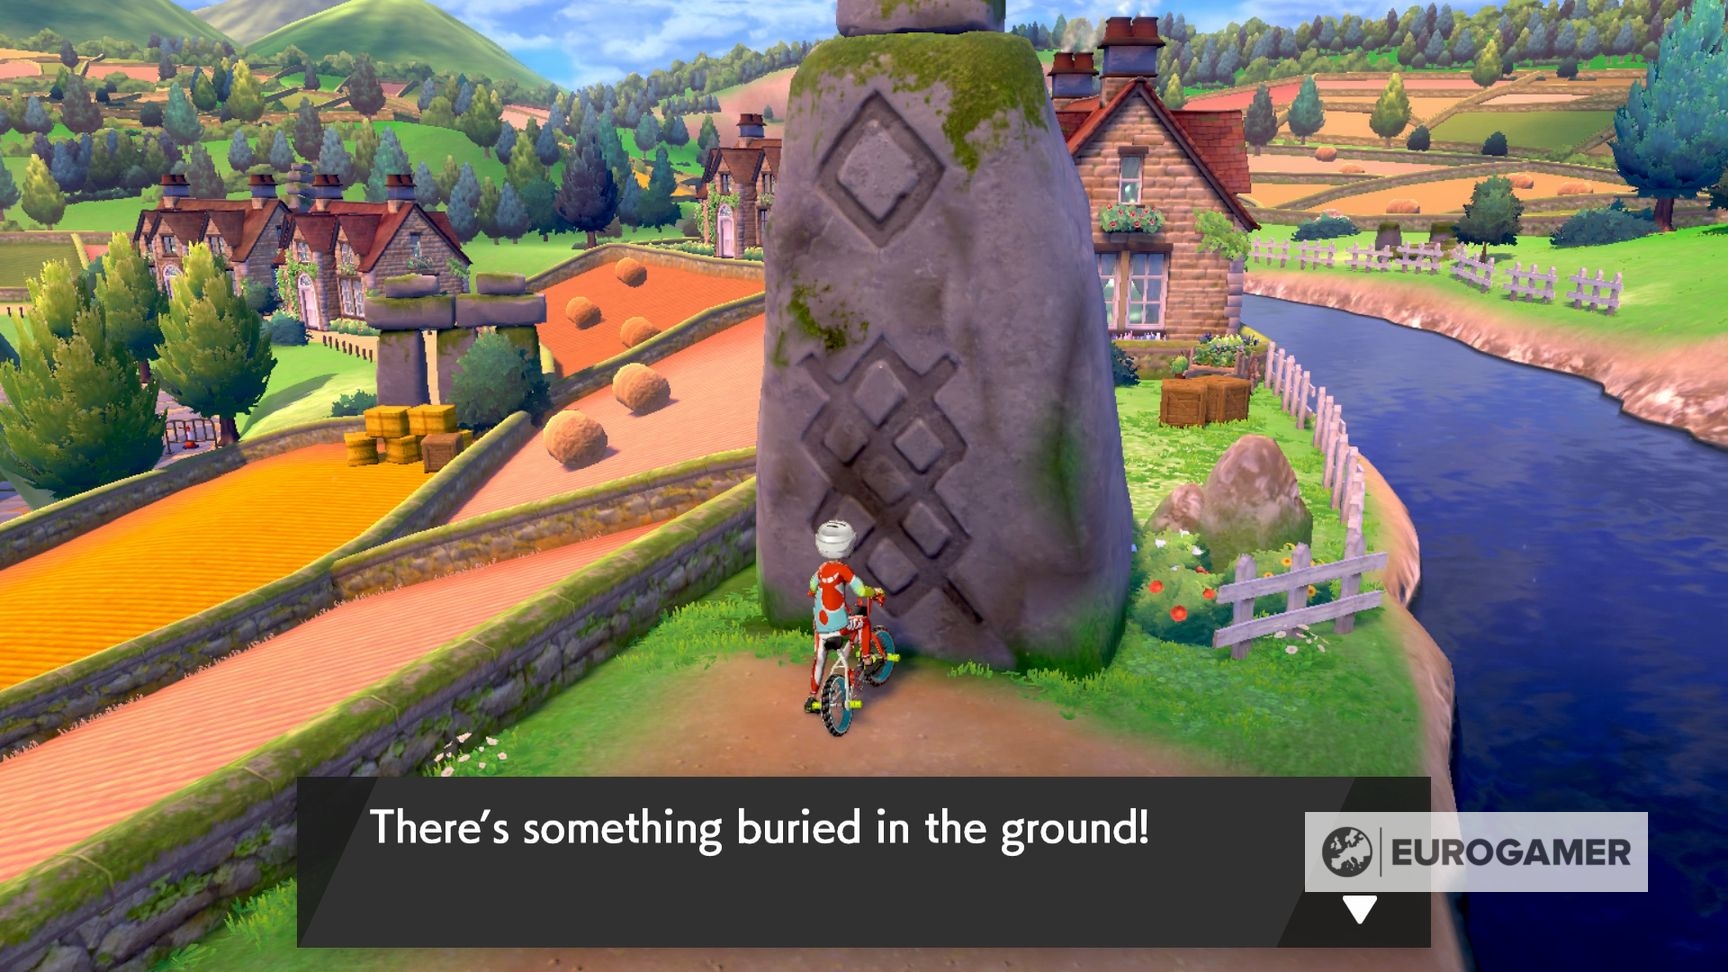 Pokémon Sword and Shield Turffield treasure riddle solution how to solve the three standing stones puzzle